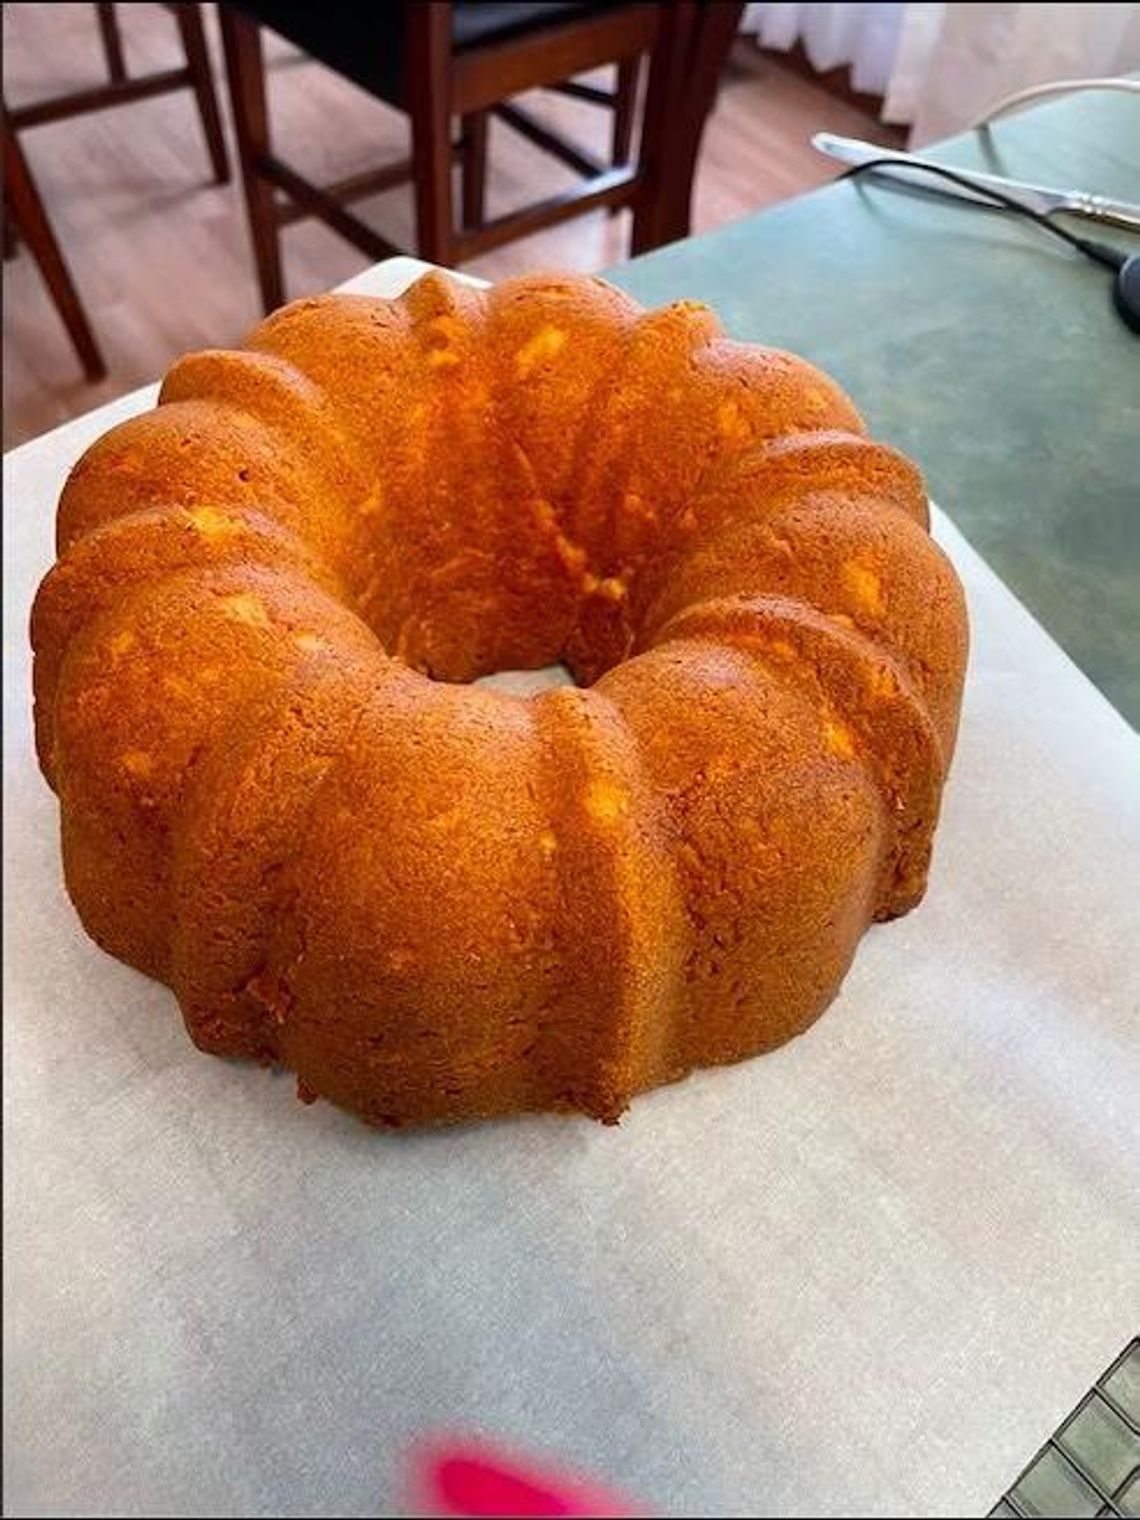 on the table:  BUNDT CAKE  